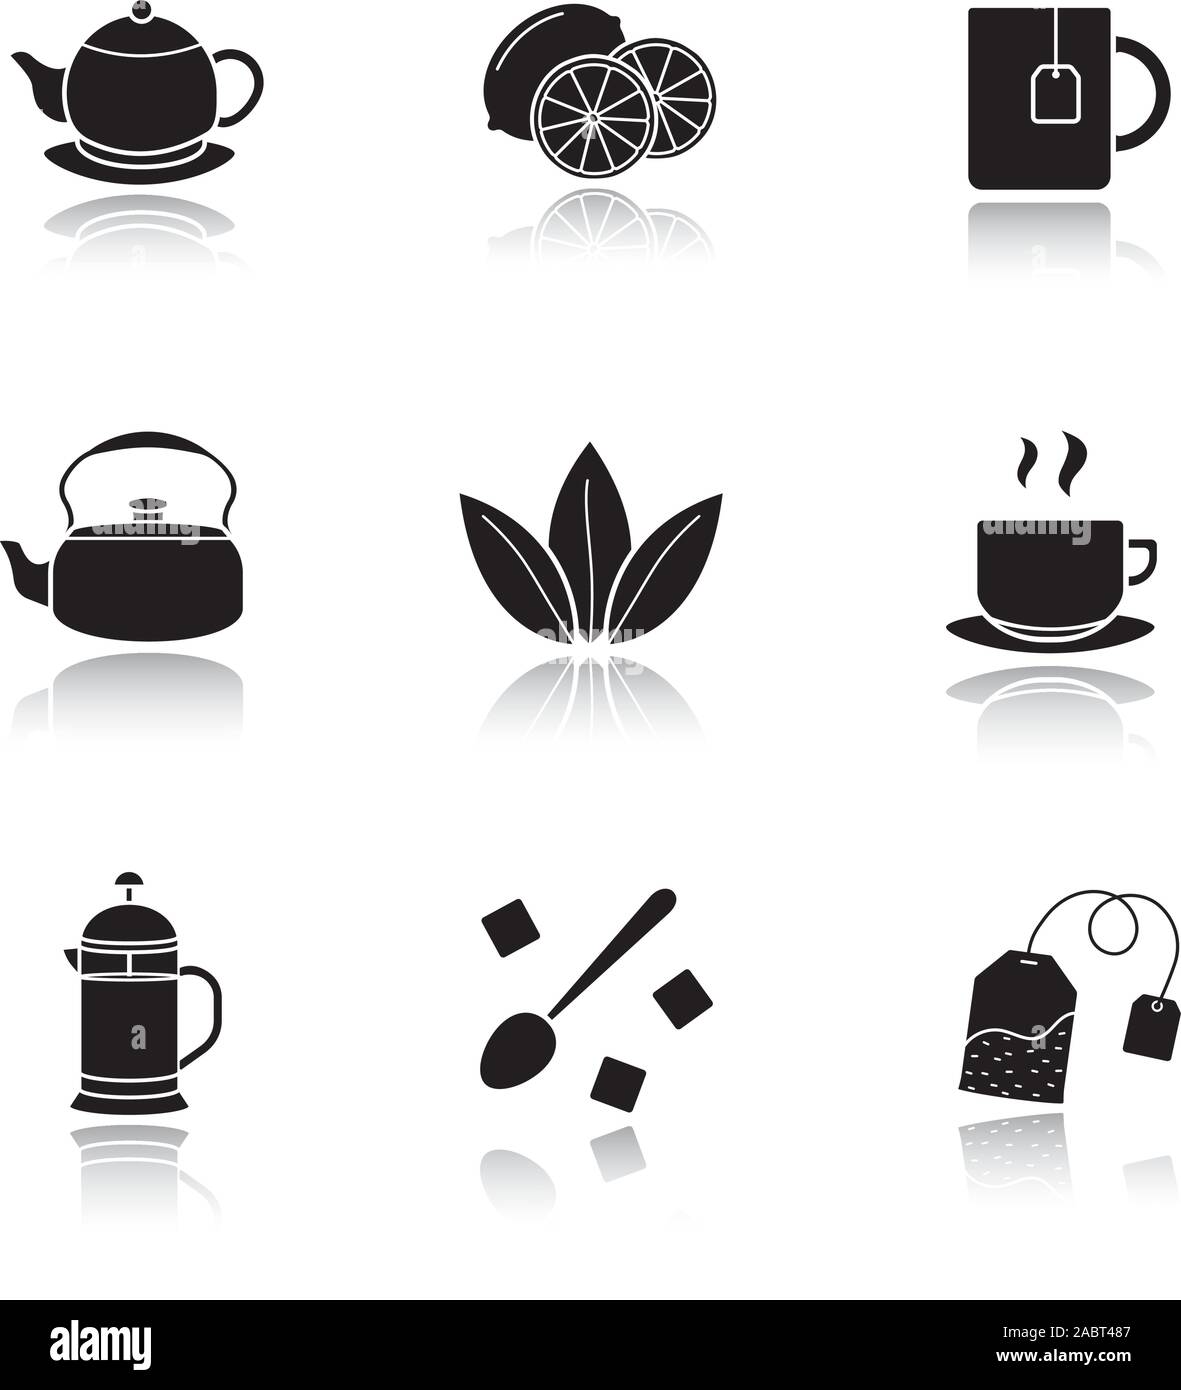 Tea drop shadow black icons set. Cutted lemon, steaming cup on plate, brewer, teapot, loose tea leaves, teabag, refined sugar cubes with spoon, kettle Stock Vector